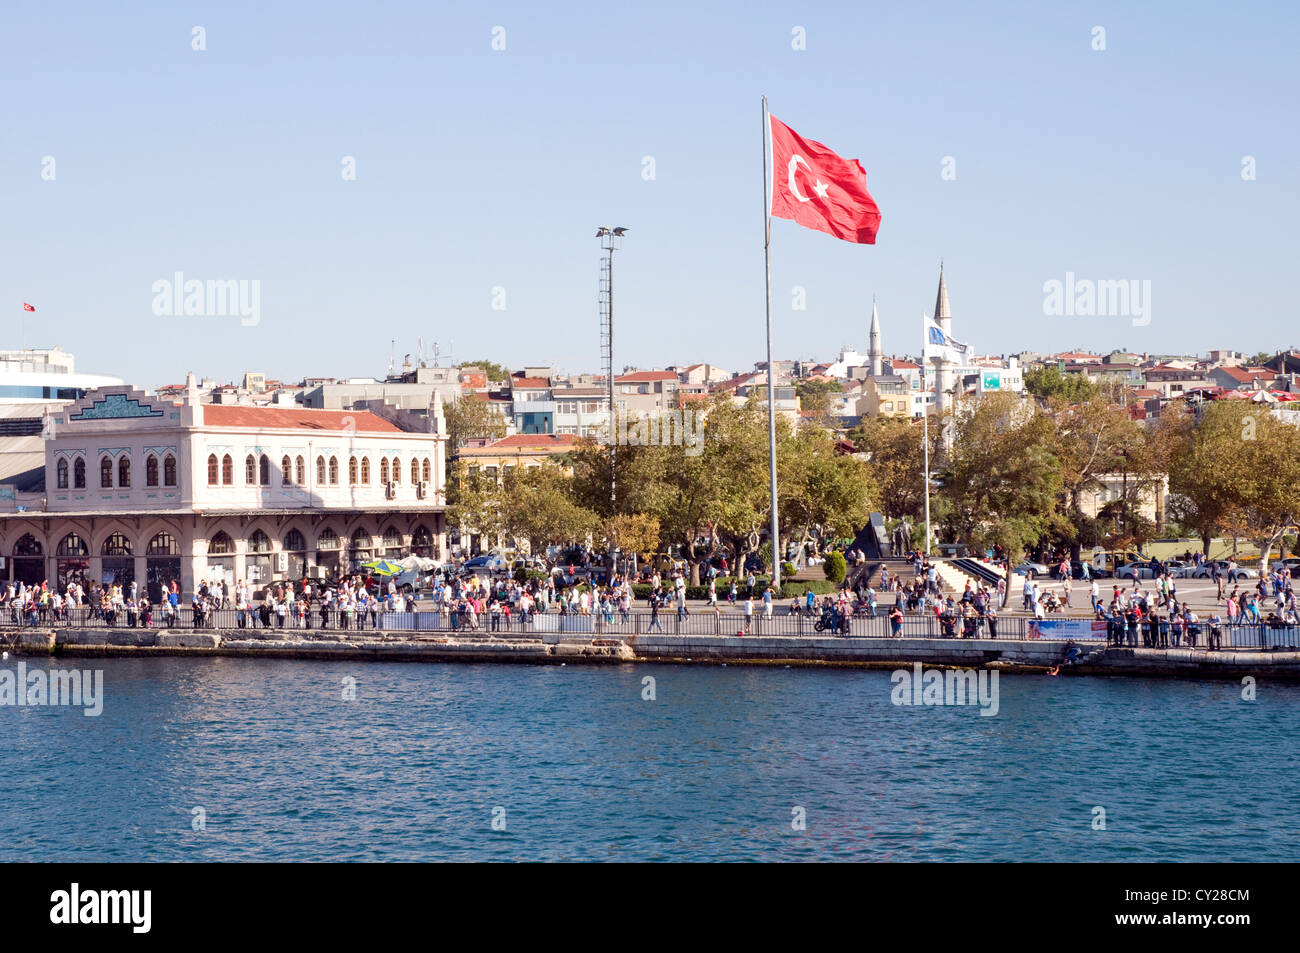 The main ferry terminal at the port of Kadikoy (Kadıköy), on the Sea of Marmara and the Asian side of the Golden Horn in the city of Istanbul, Turkey. Stock Photo